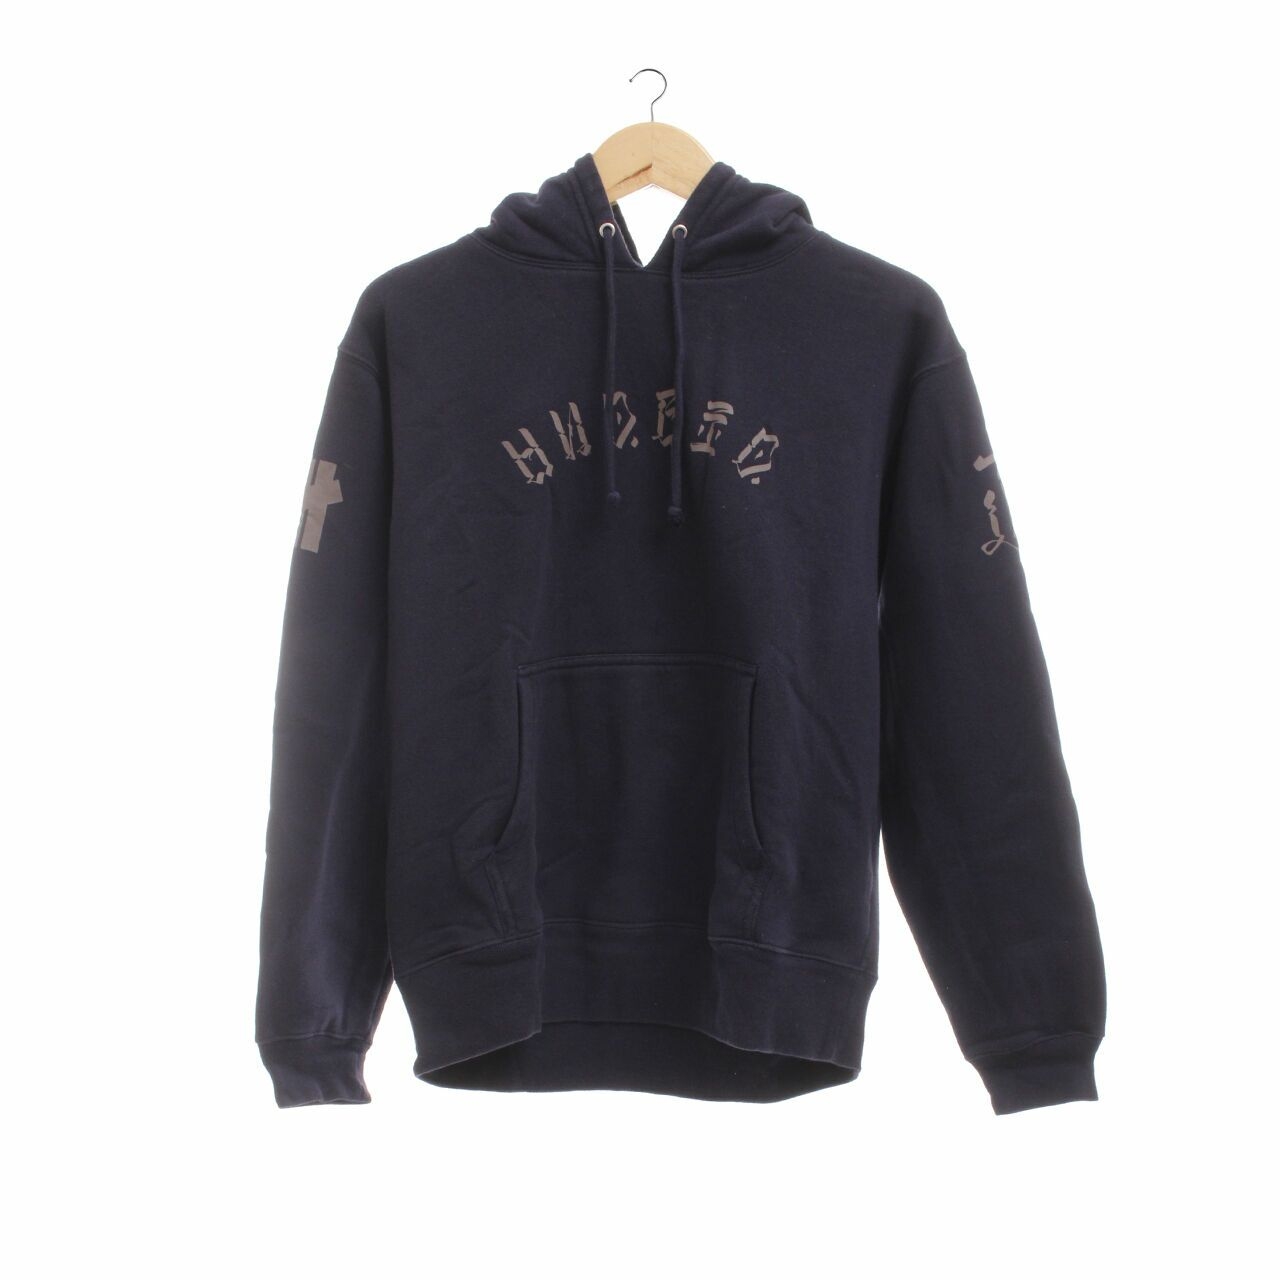 Undefeated Navy Sweater